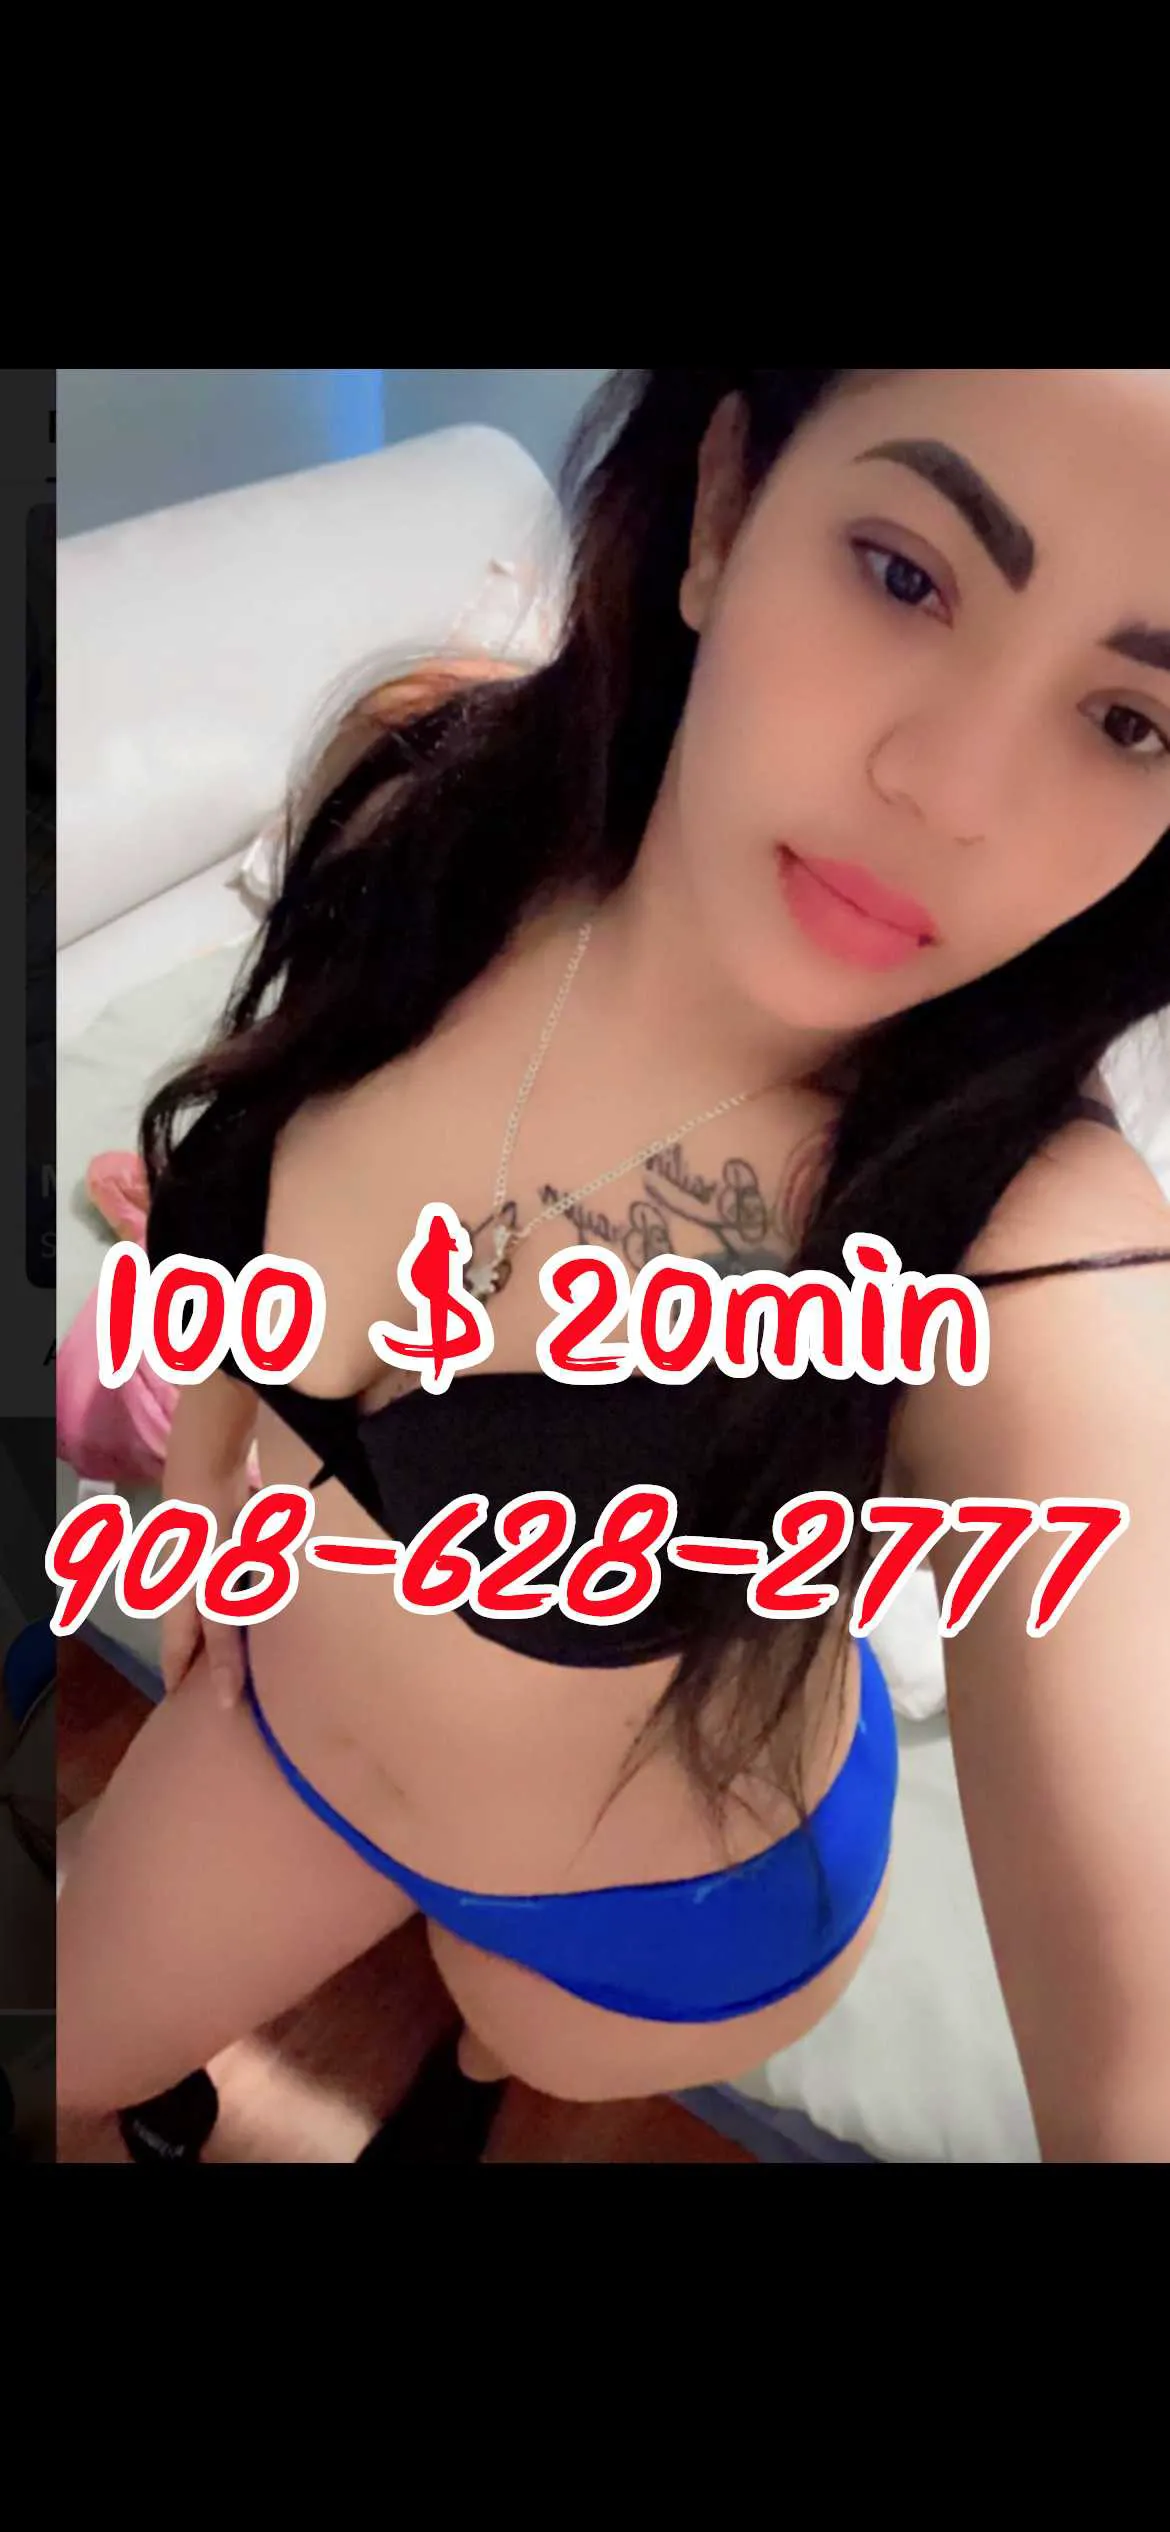 Reviews about escort with phone number 9086282777